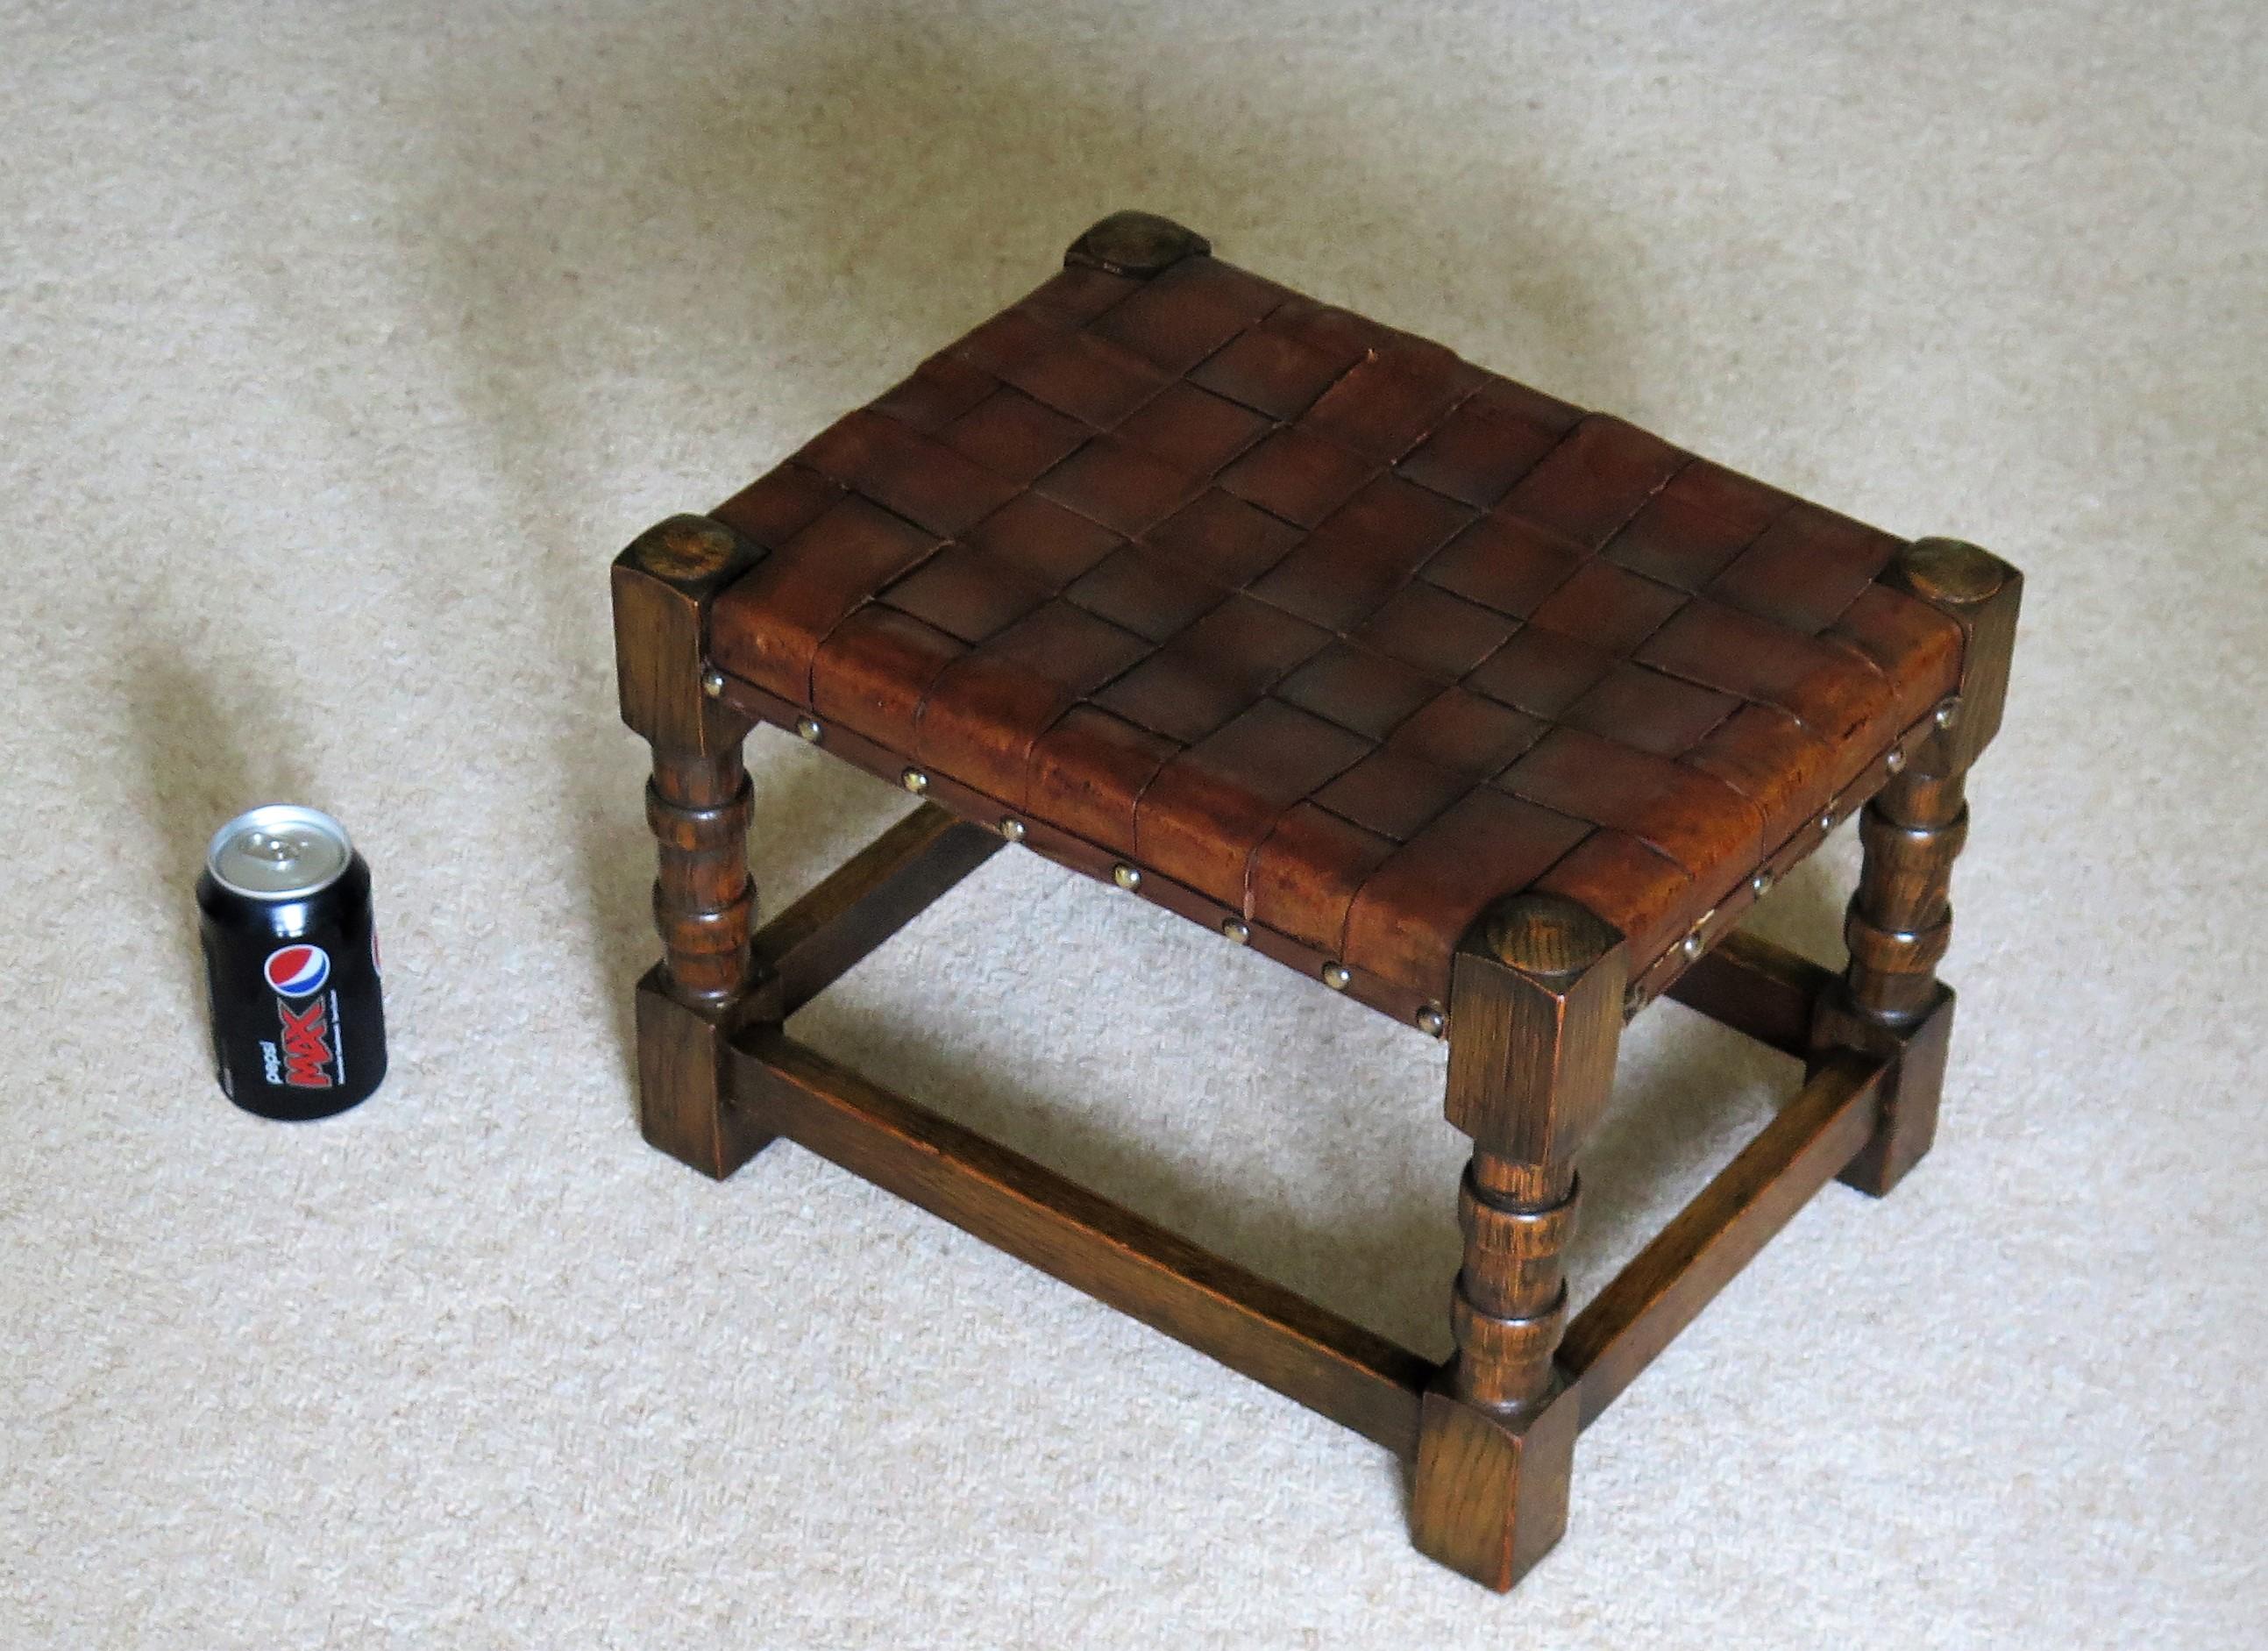 Handmade Oak Stool with Leather Strap Top, Arts & Crafts Late 19th Century For Sale 8